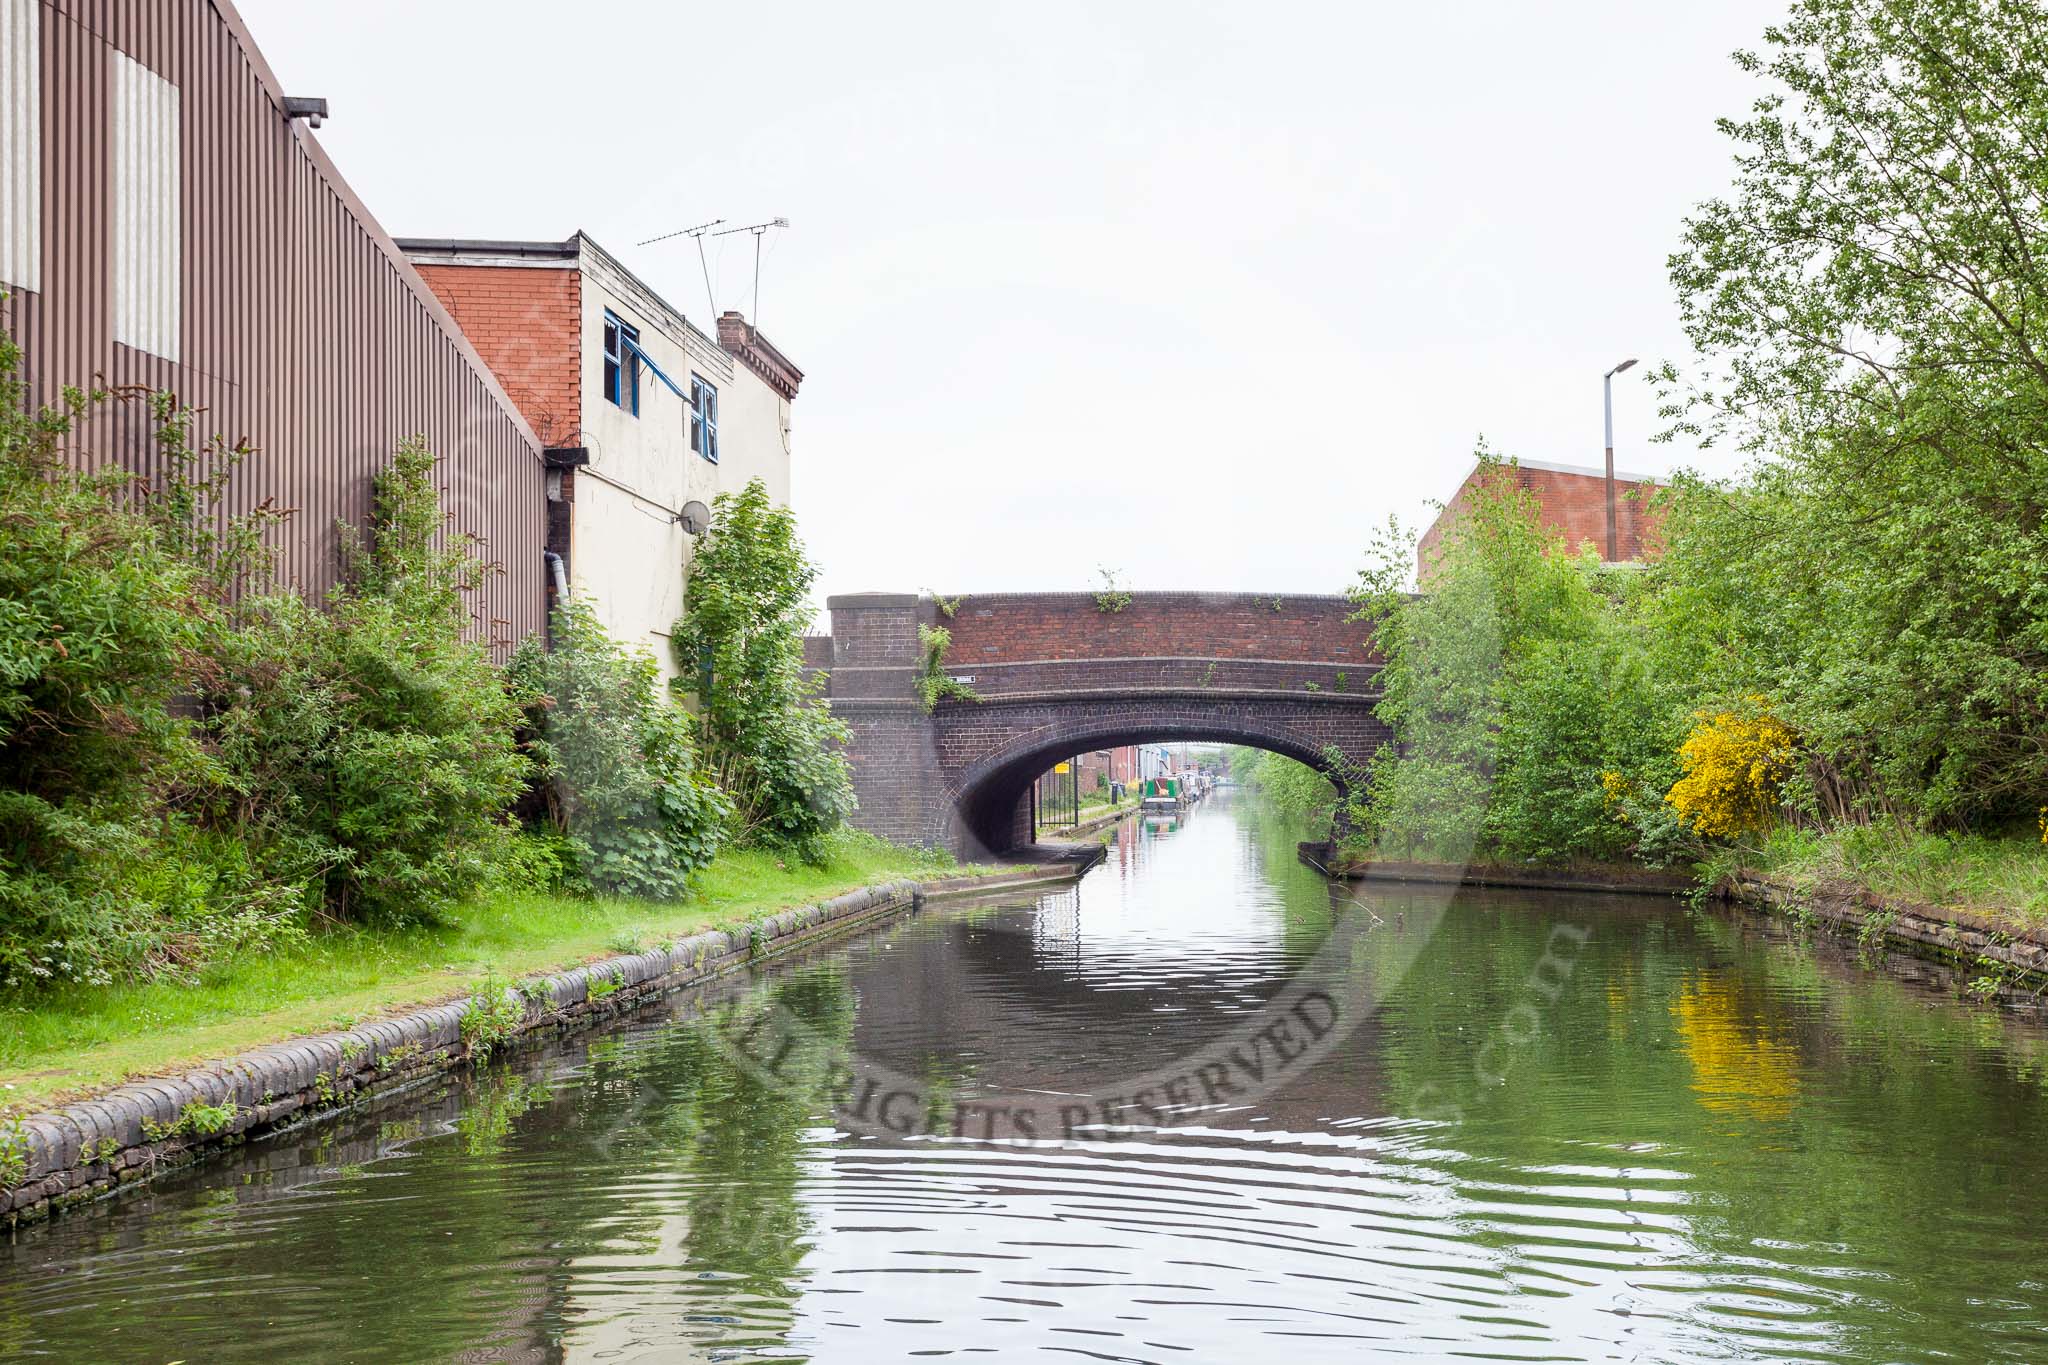 BCN 24h Marathon Challenge 2015: Engine Bridge, on the BCN Engine Arm, looking towards the terminus. The former pub on the left seems to be in a ppor state..
Birmingham Canal Navigations,



on 23 May 2015 at 10:46, image #75